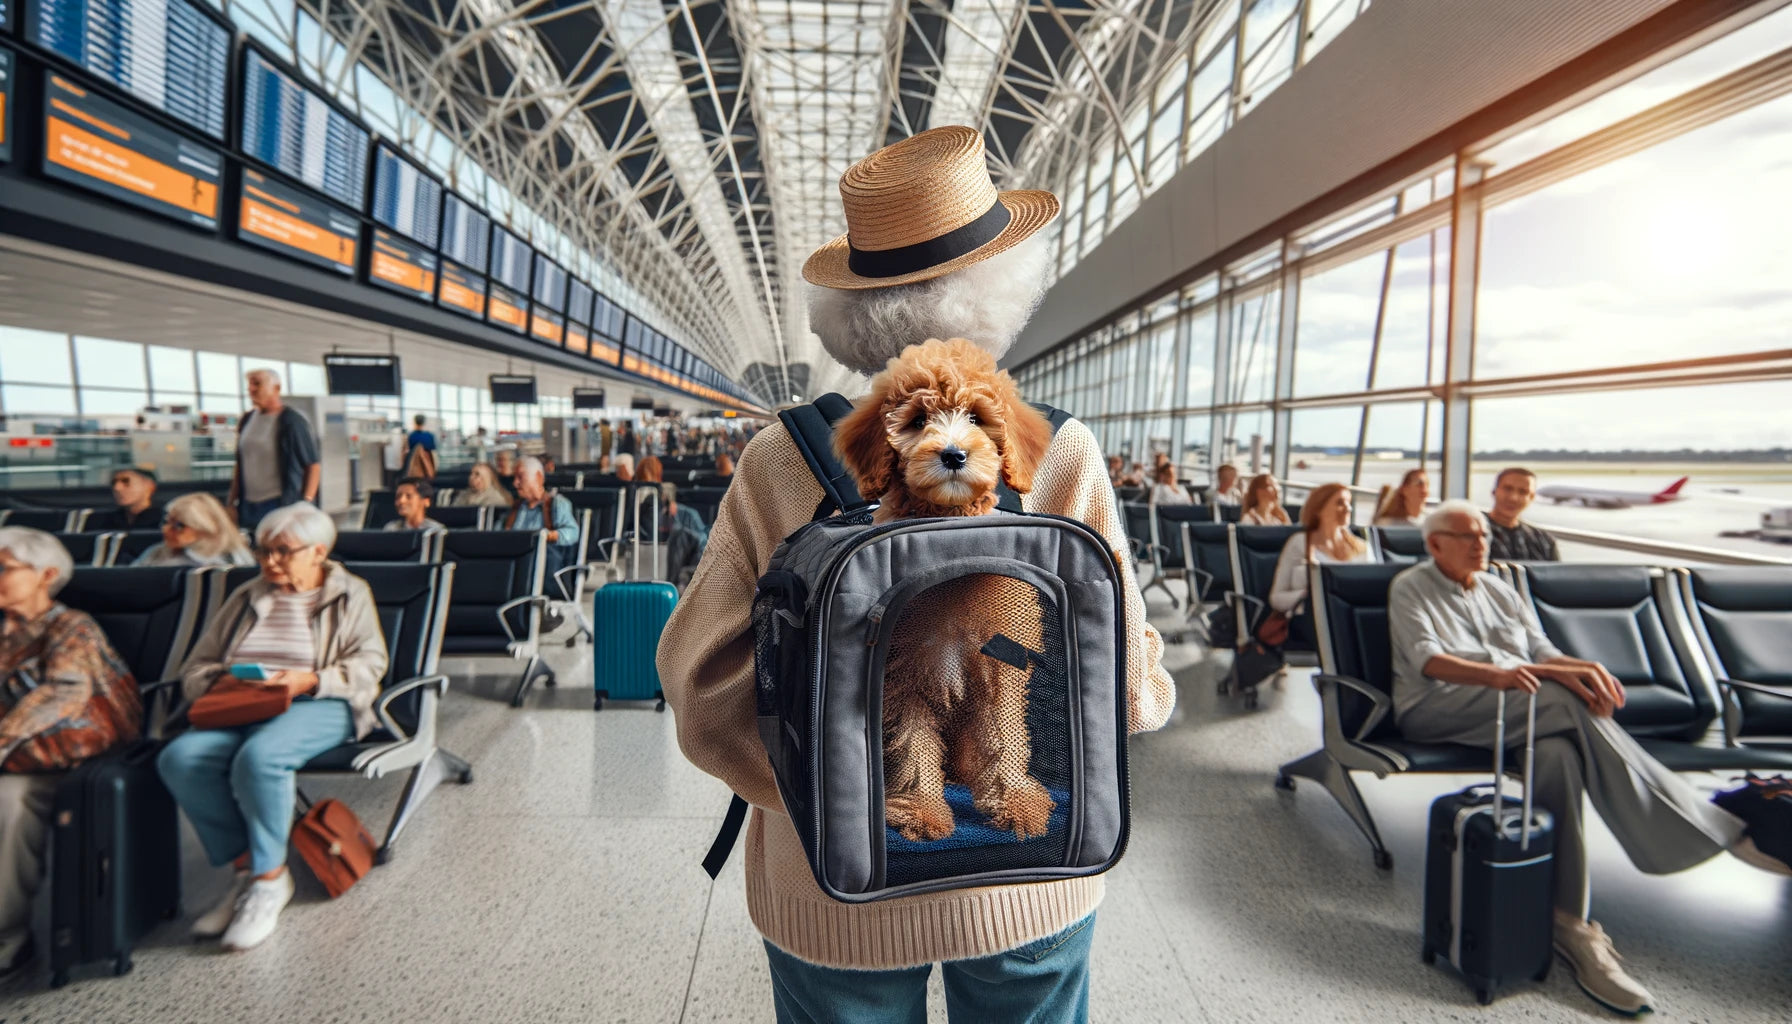 Baby Boomer traveling with their Mini Goldendoodle in a pet carrier at an airport, showcasing the breed's travel-friendly size and demeanor.